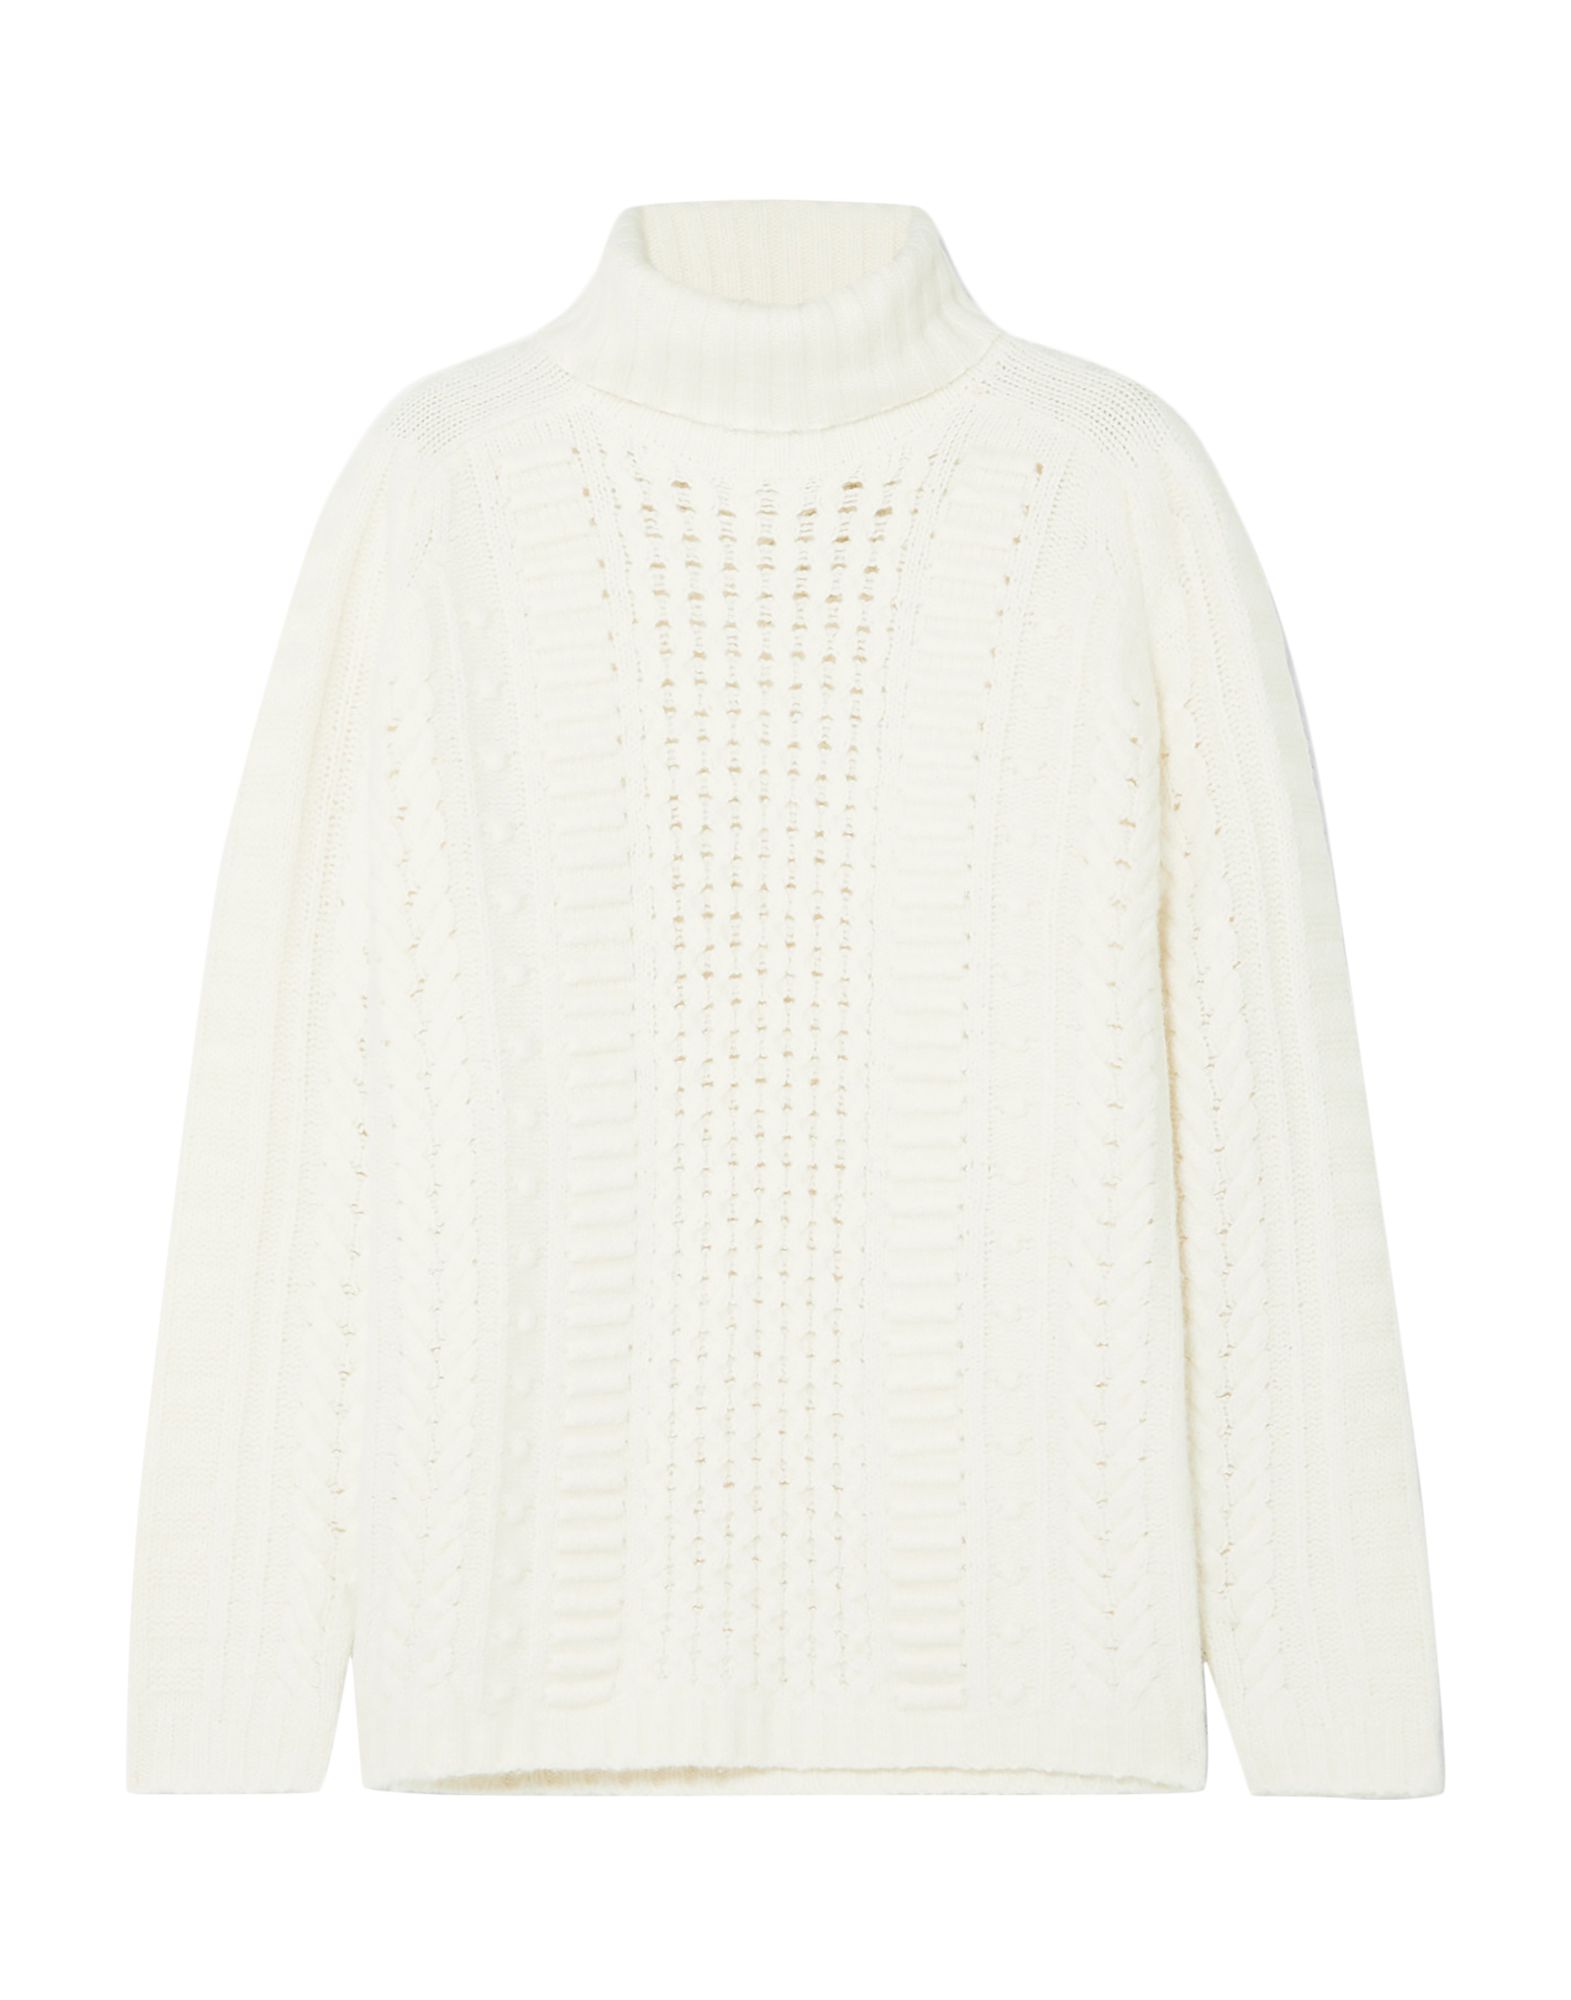 knitted, no appliqués, medium-weight knit, turtleneck, basic solid color, long sleeves, no pockets, 